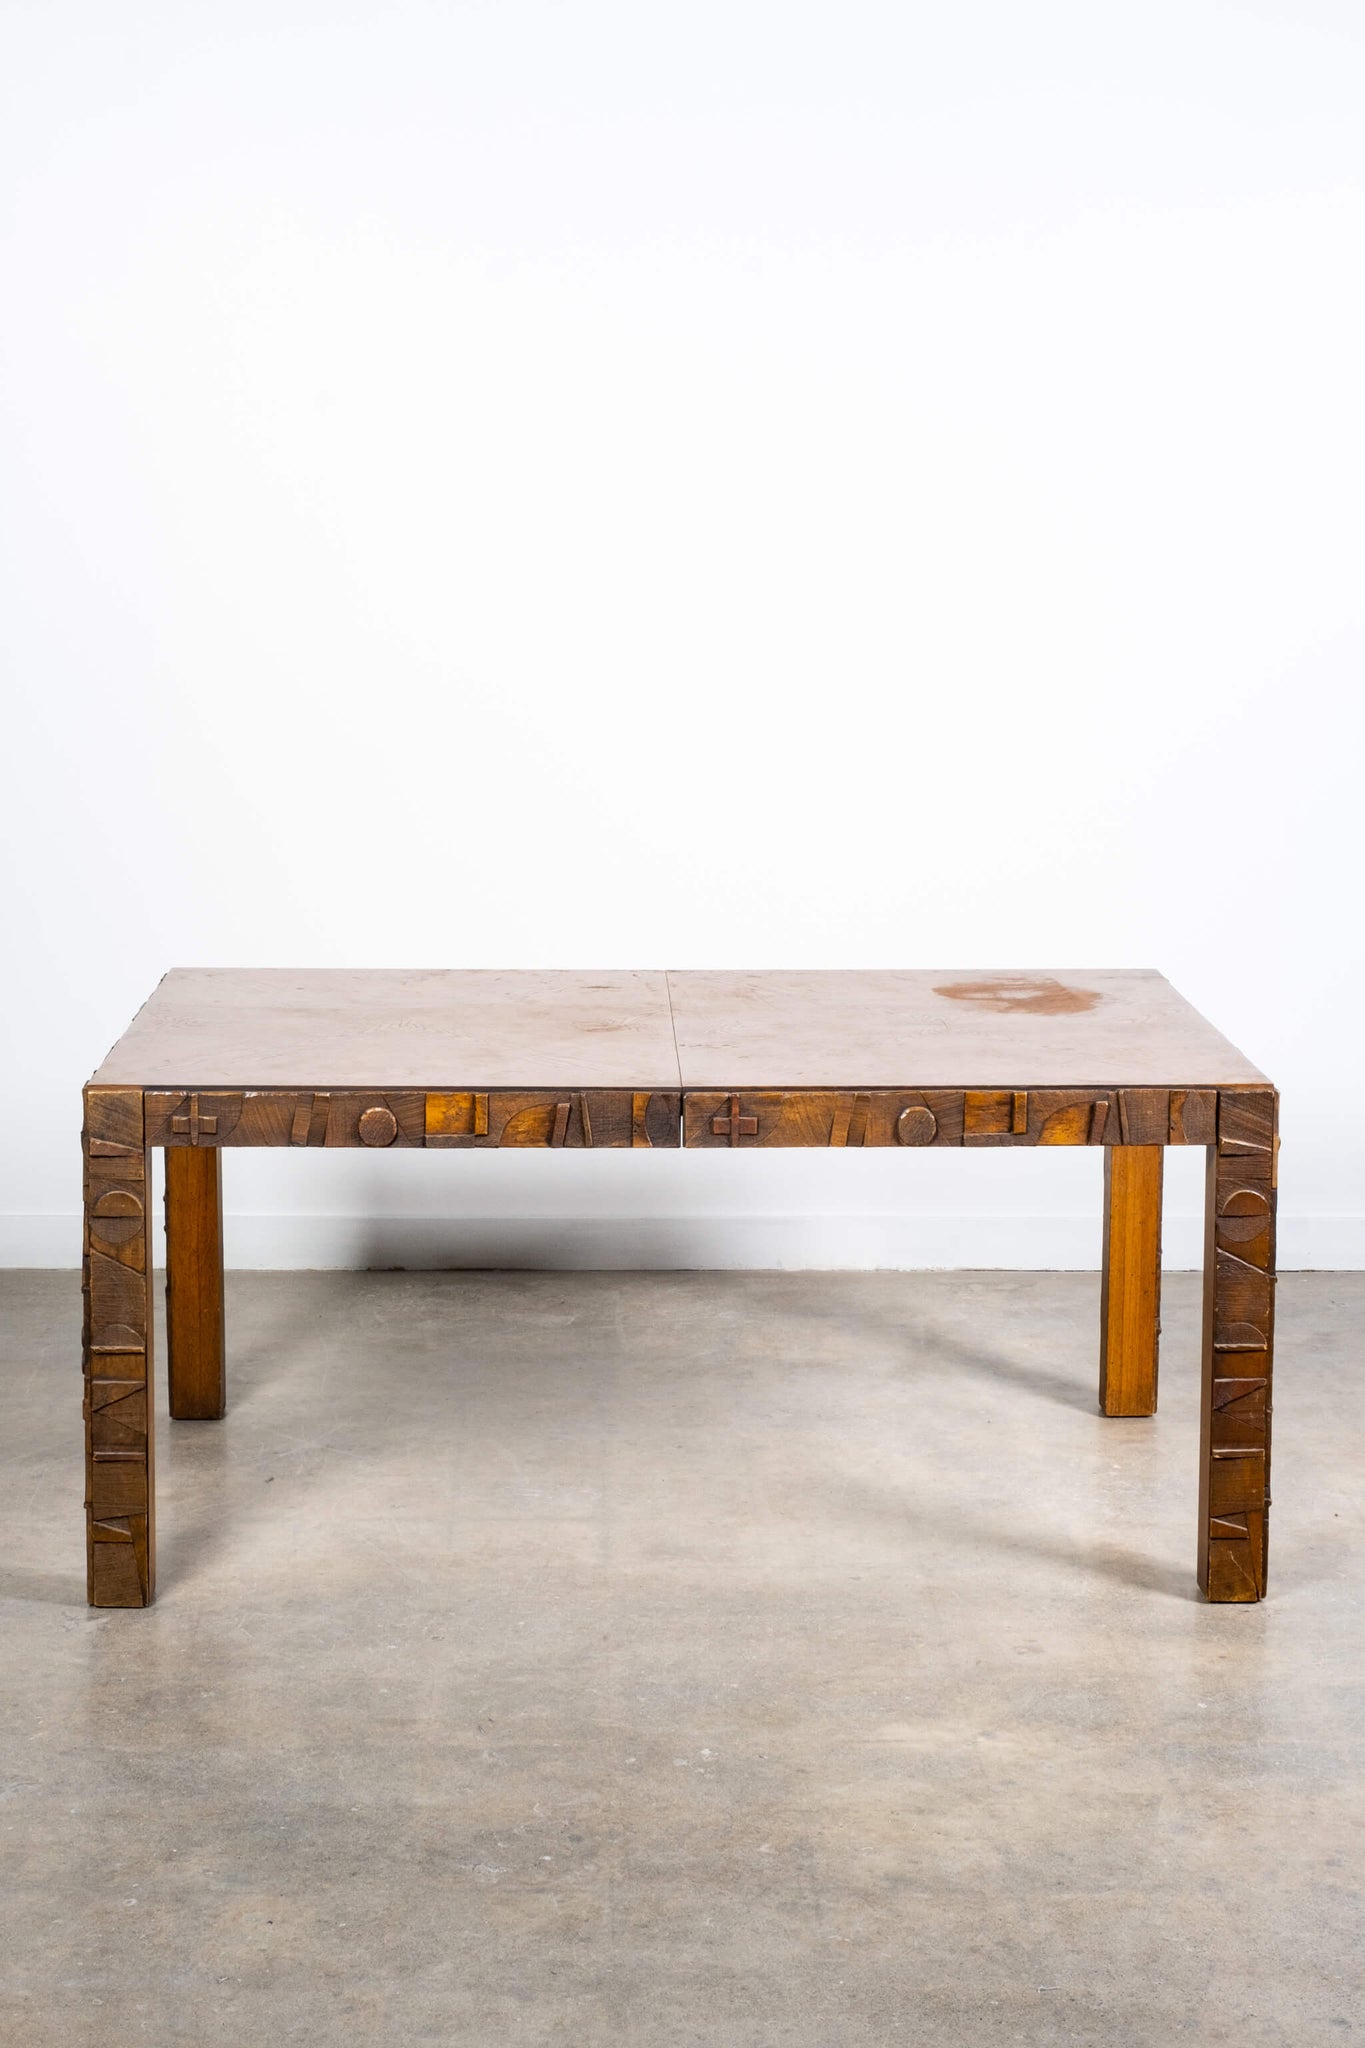 Vintage Brutalist Dining Table with 2 Extensions, front view with no extensions